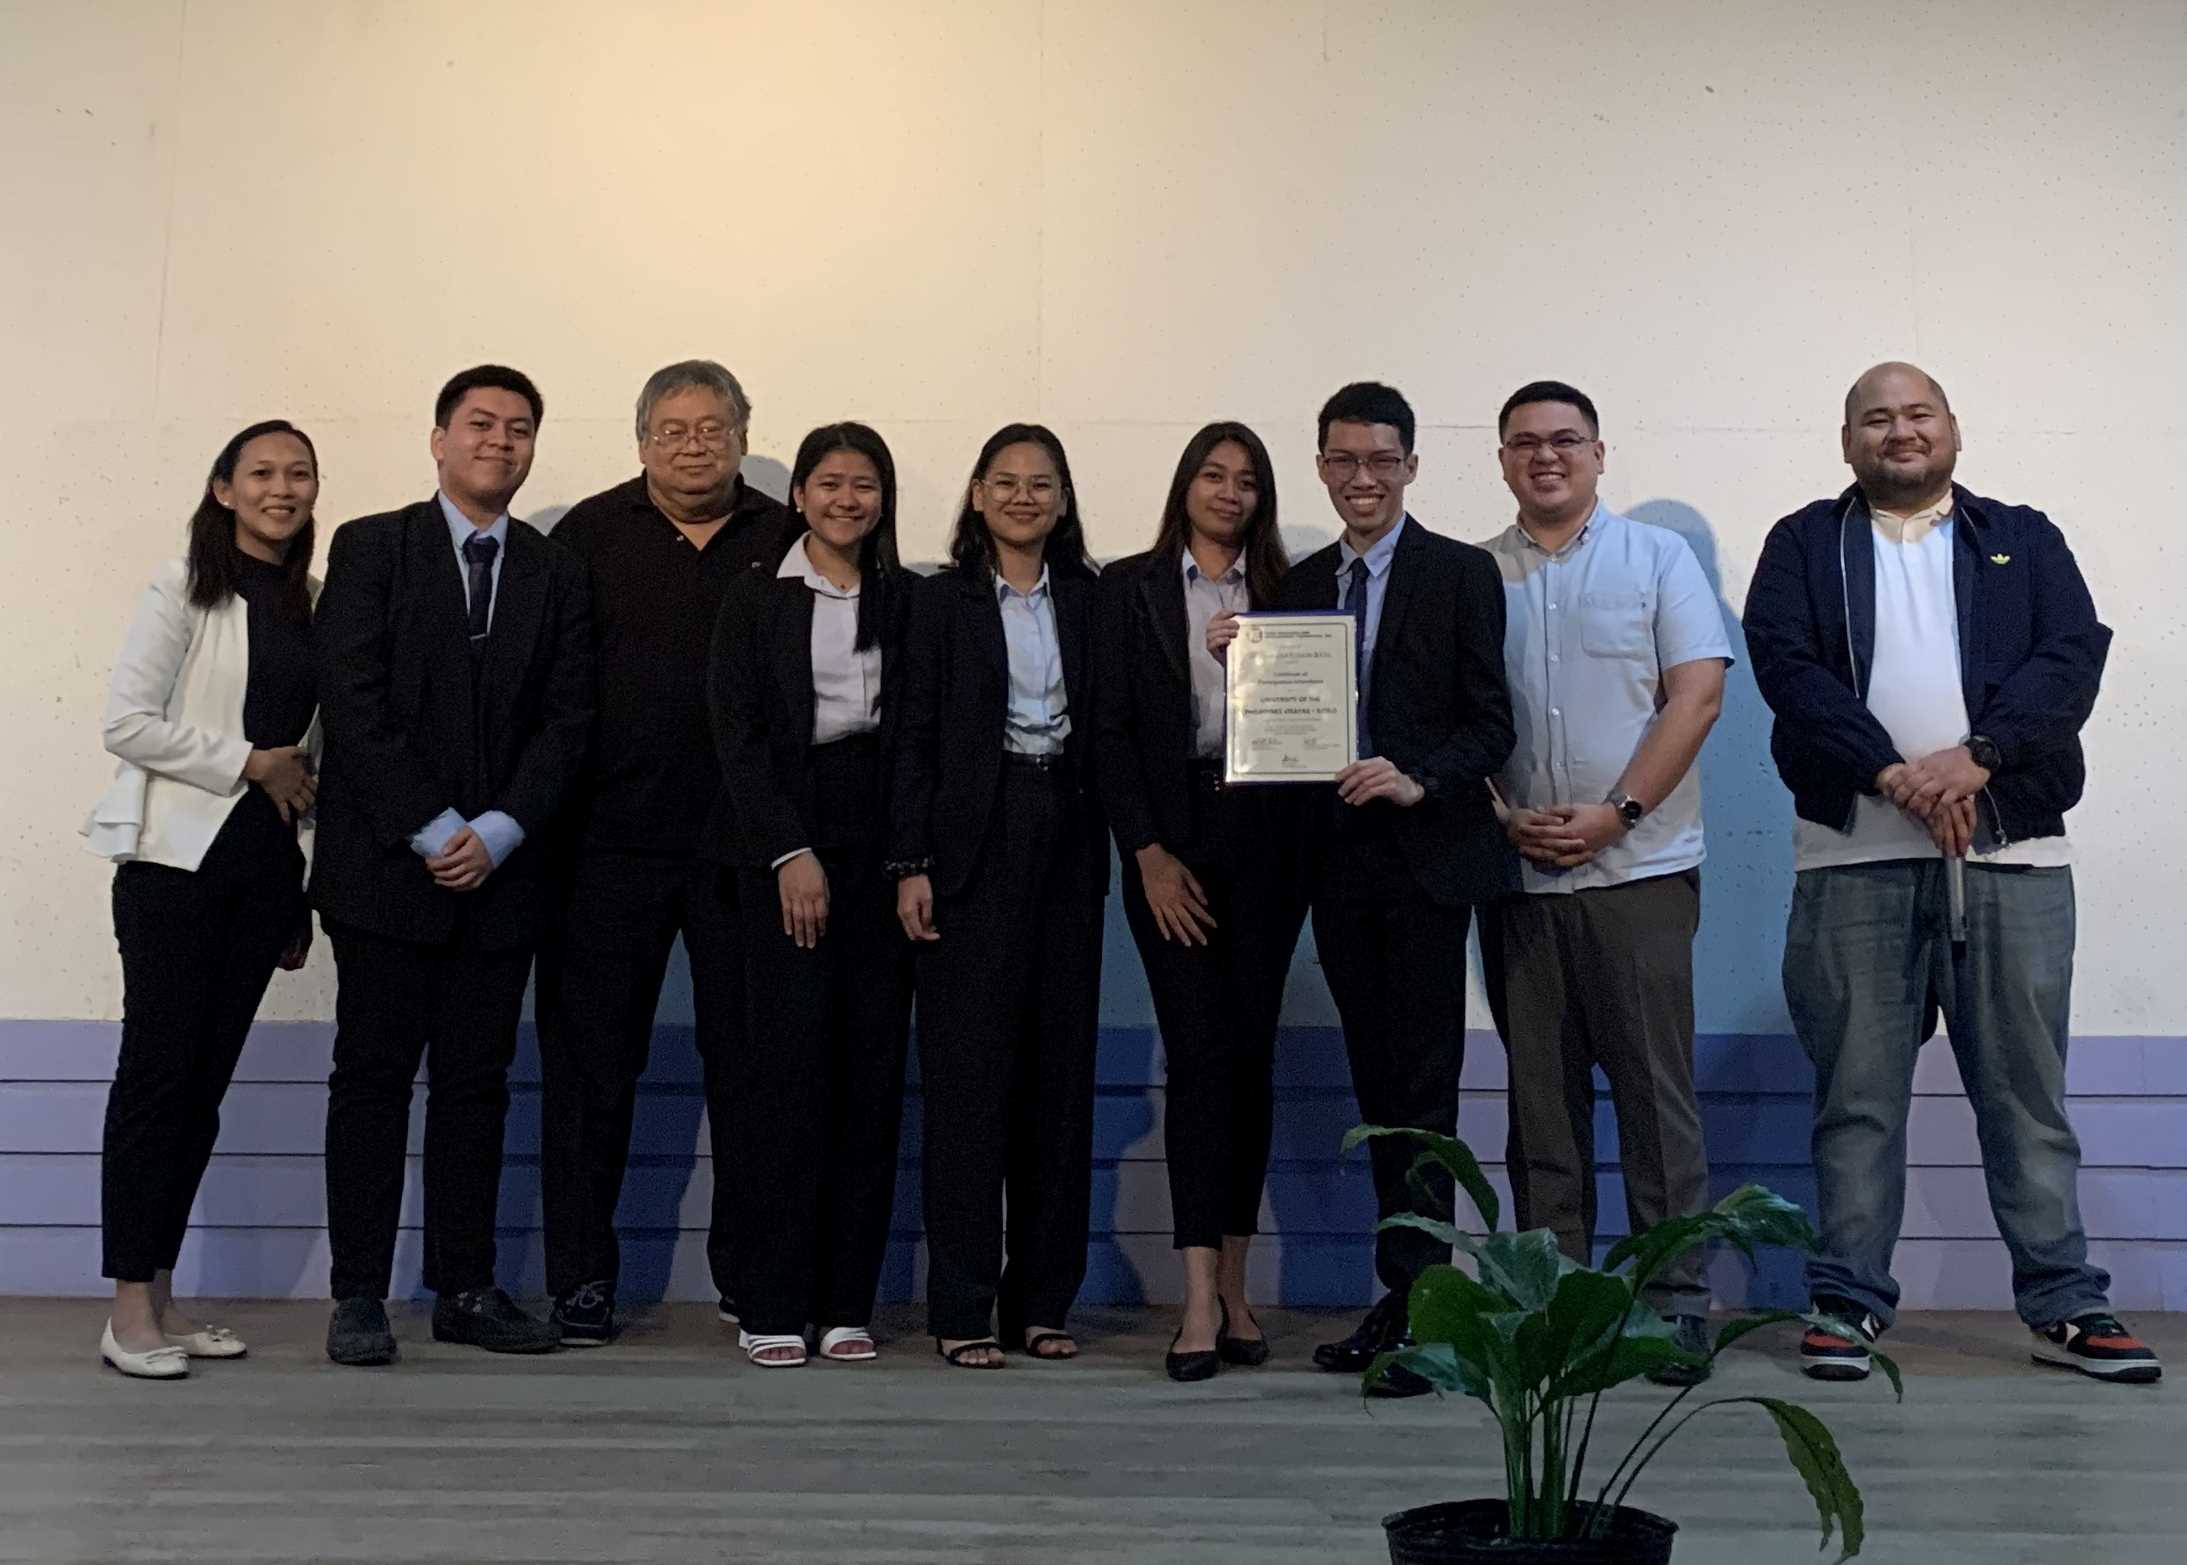 College of Management is regional champion, qualifies for the national finals of the 23rd Inter-Collegiate Finance Competition